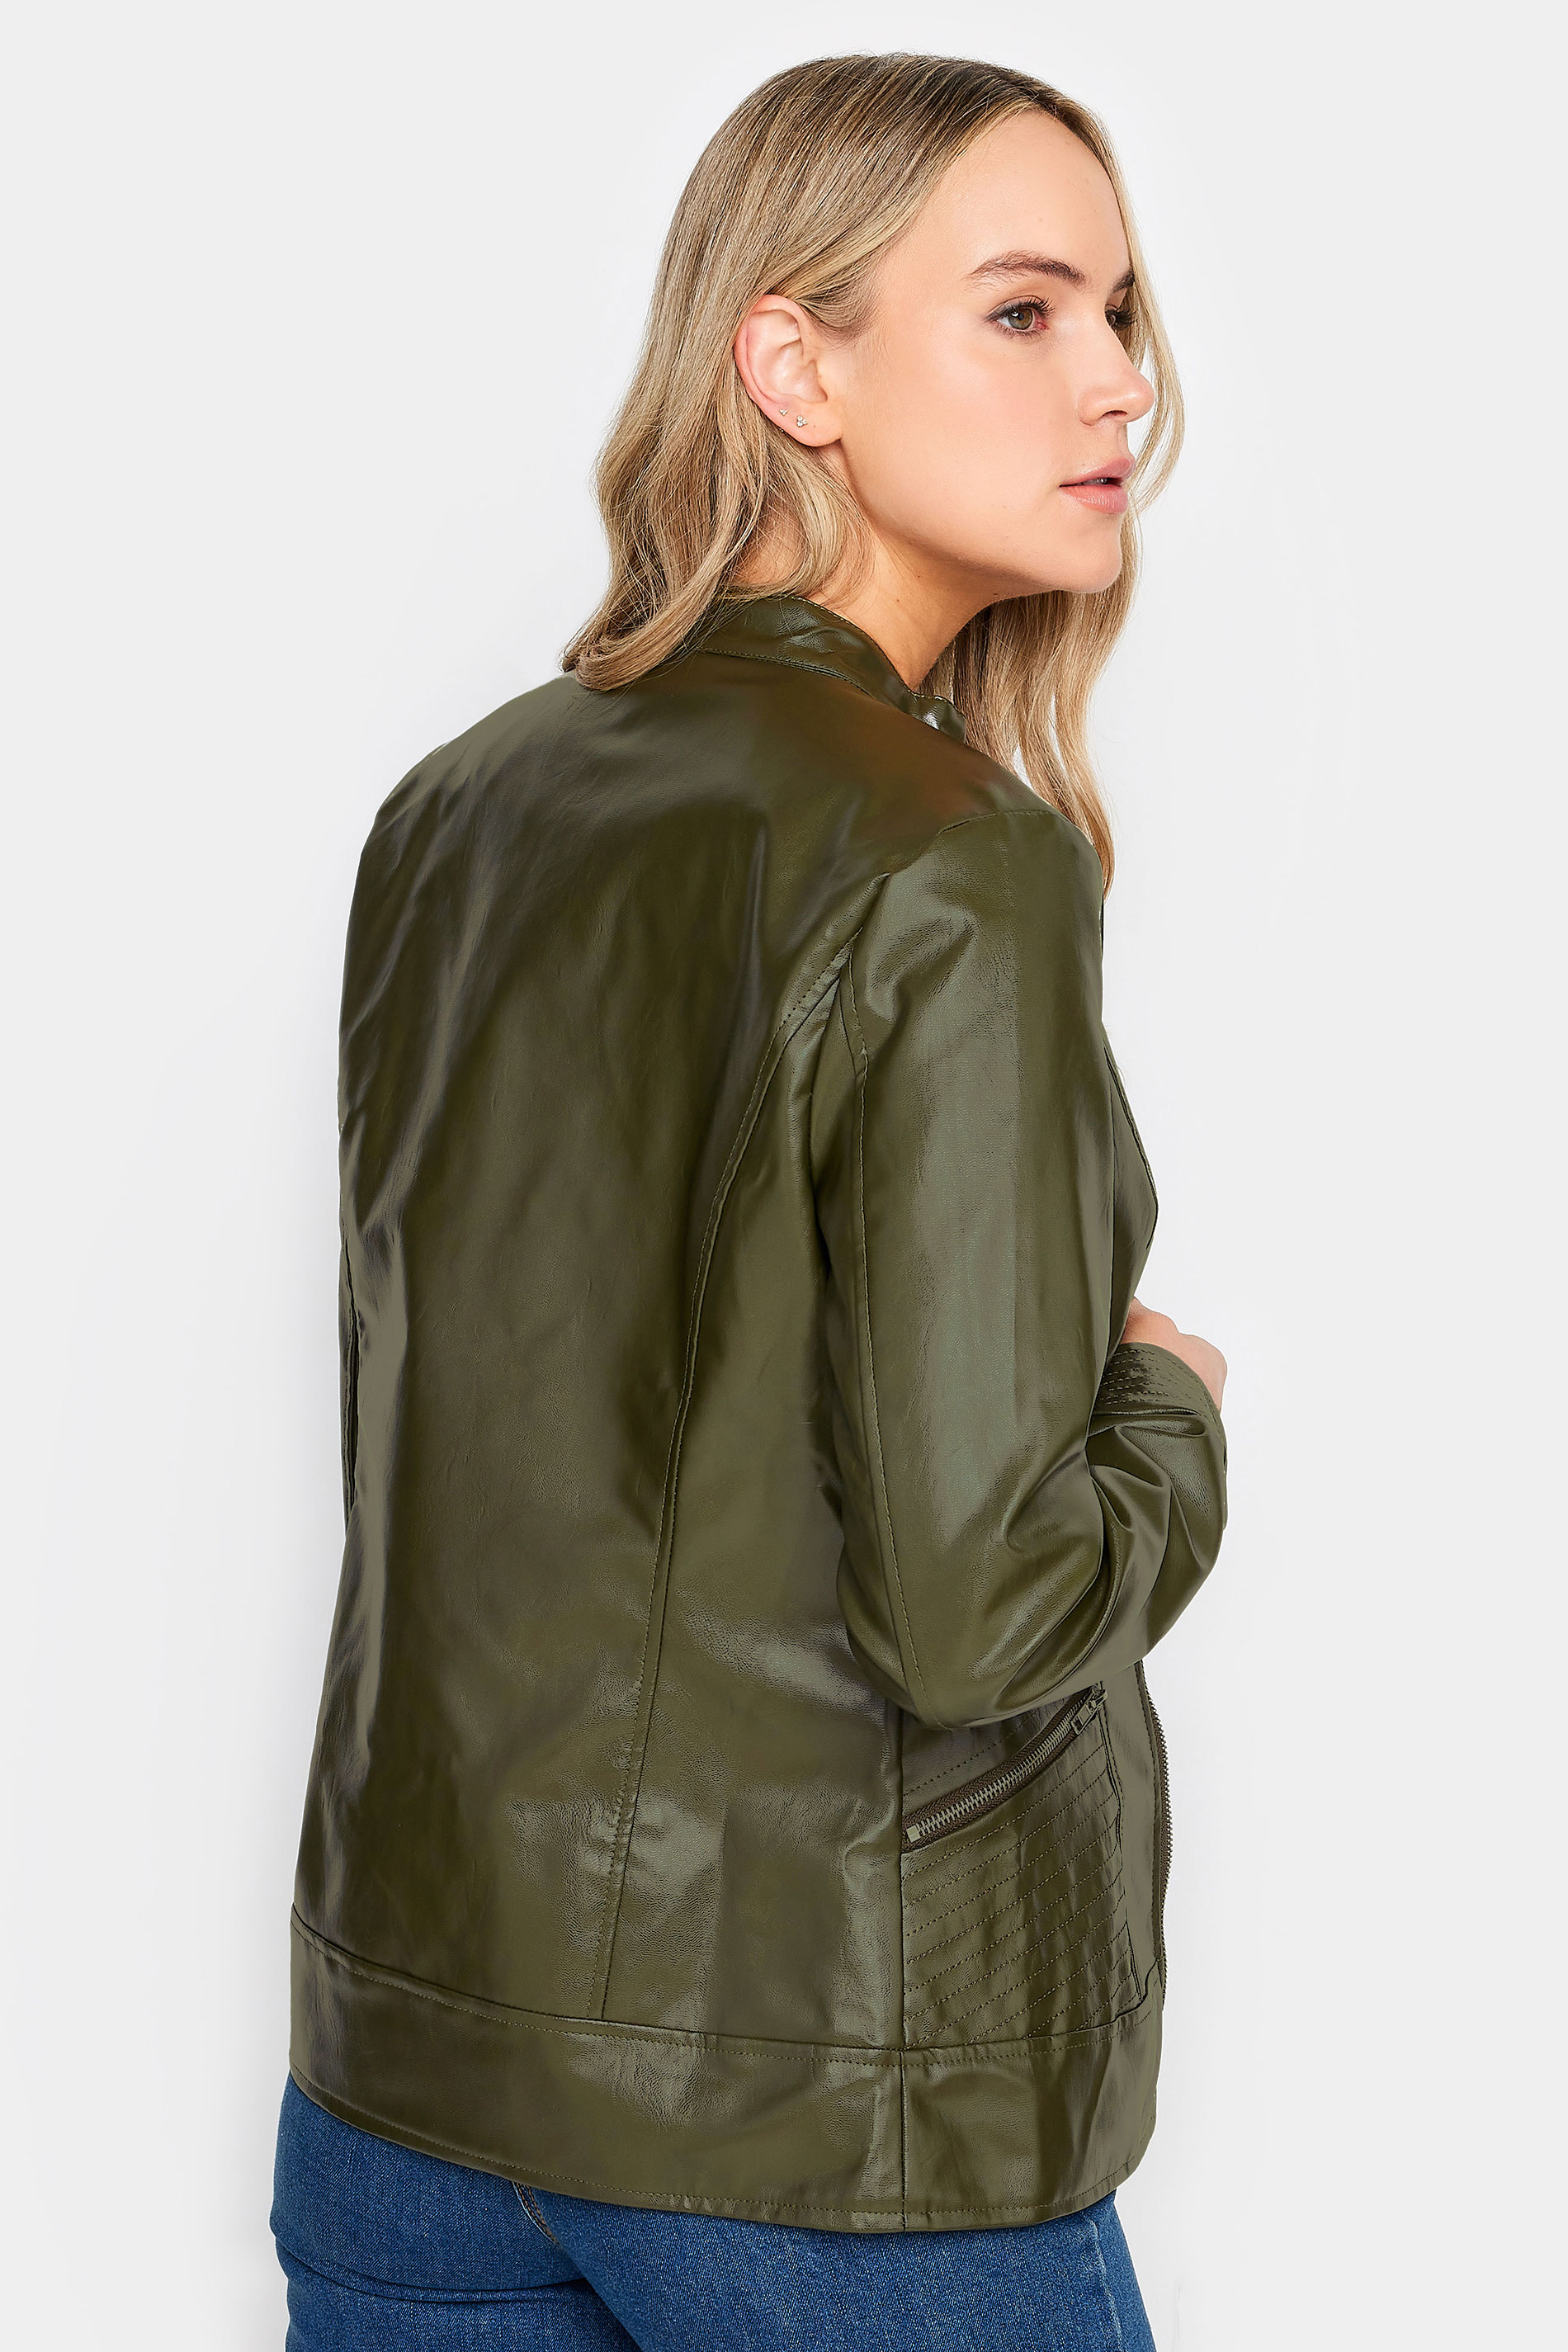 LTS Tall Khaki Green Faux Leather Funnel Neck Jacket | Long Tall Sally  3